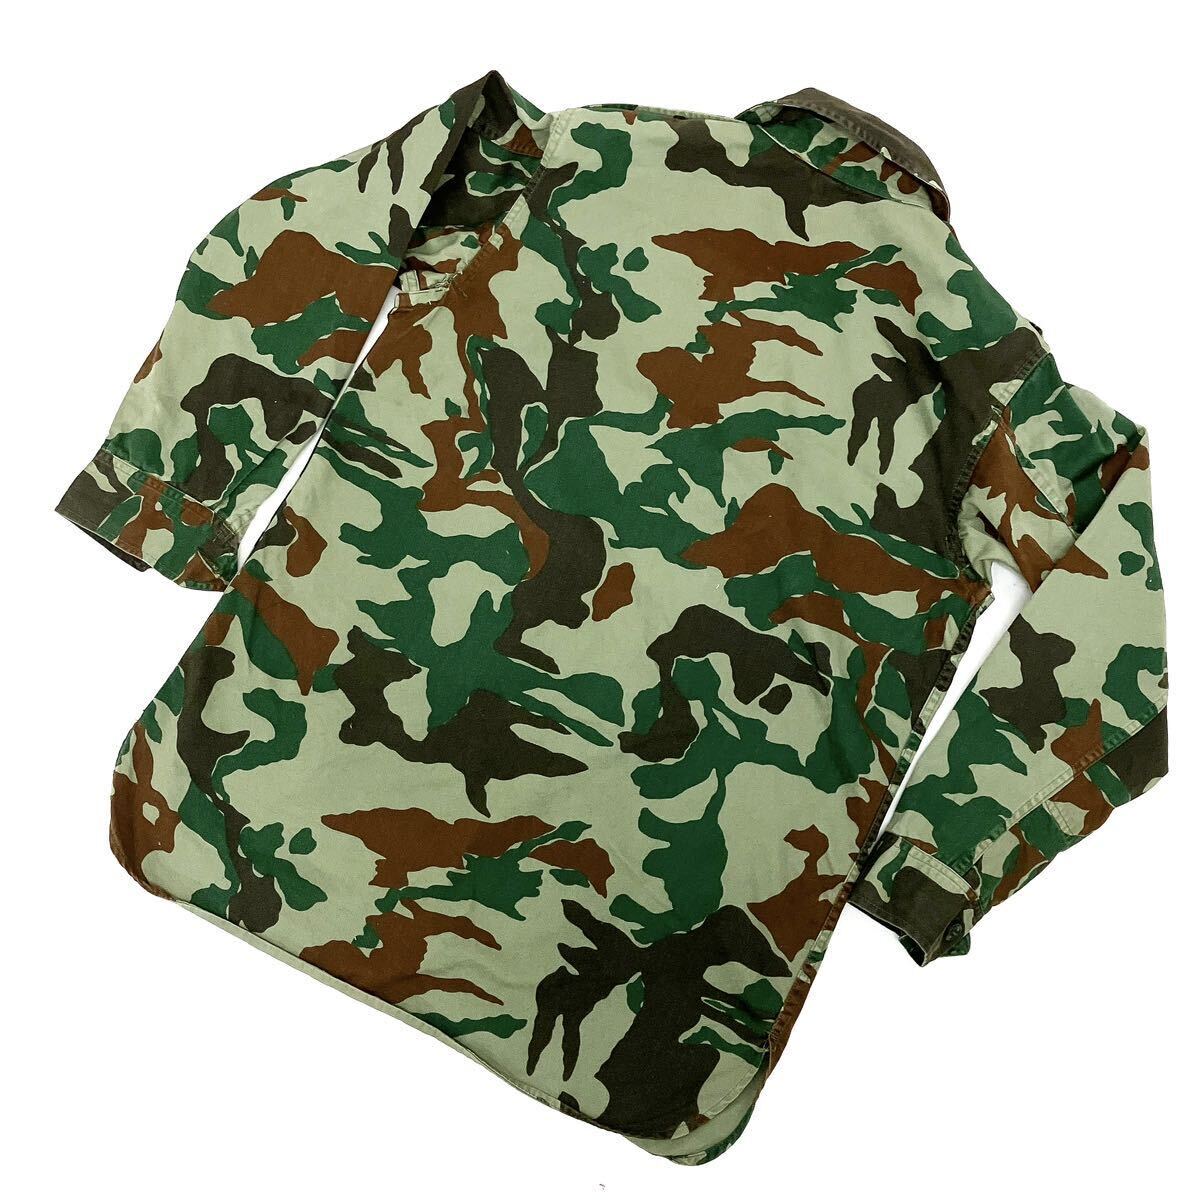  Ground Self-Defense Force old camouflage clothes top and bottom set 1. rank insignia collection alp shop 